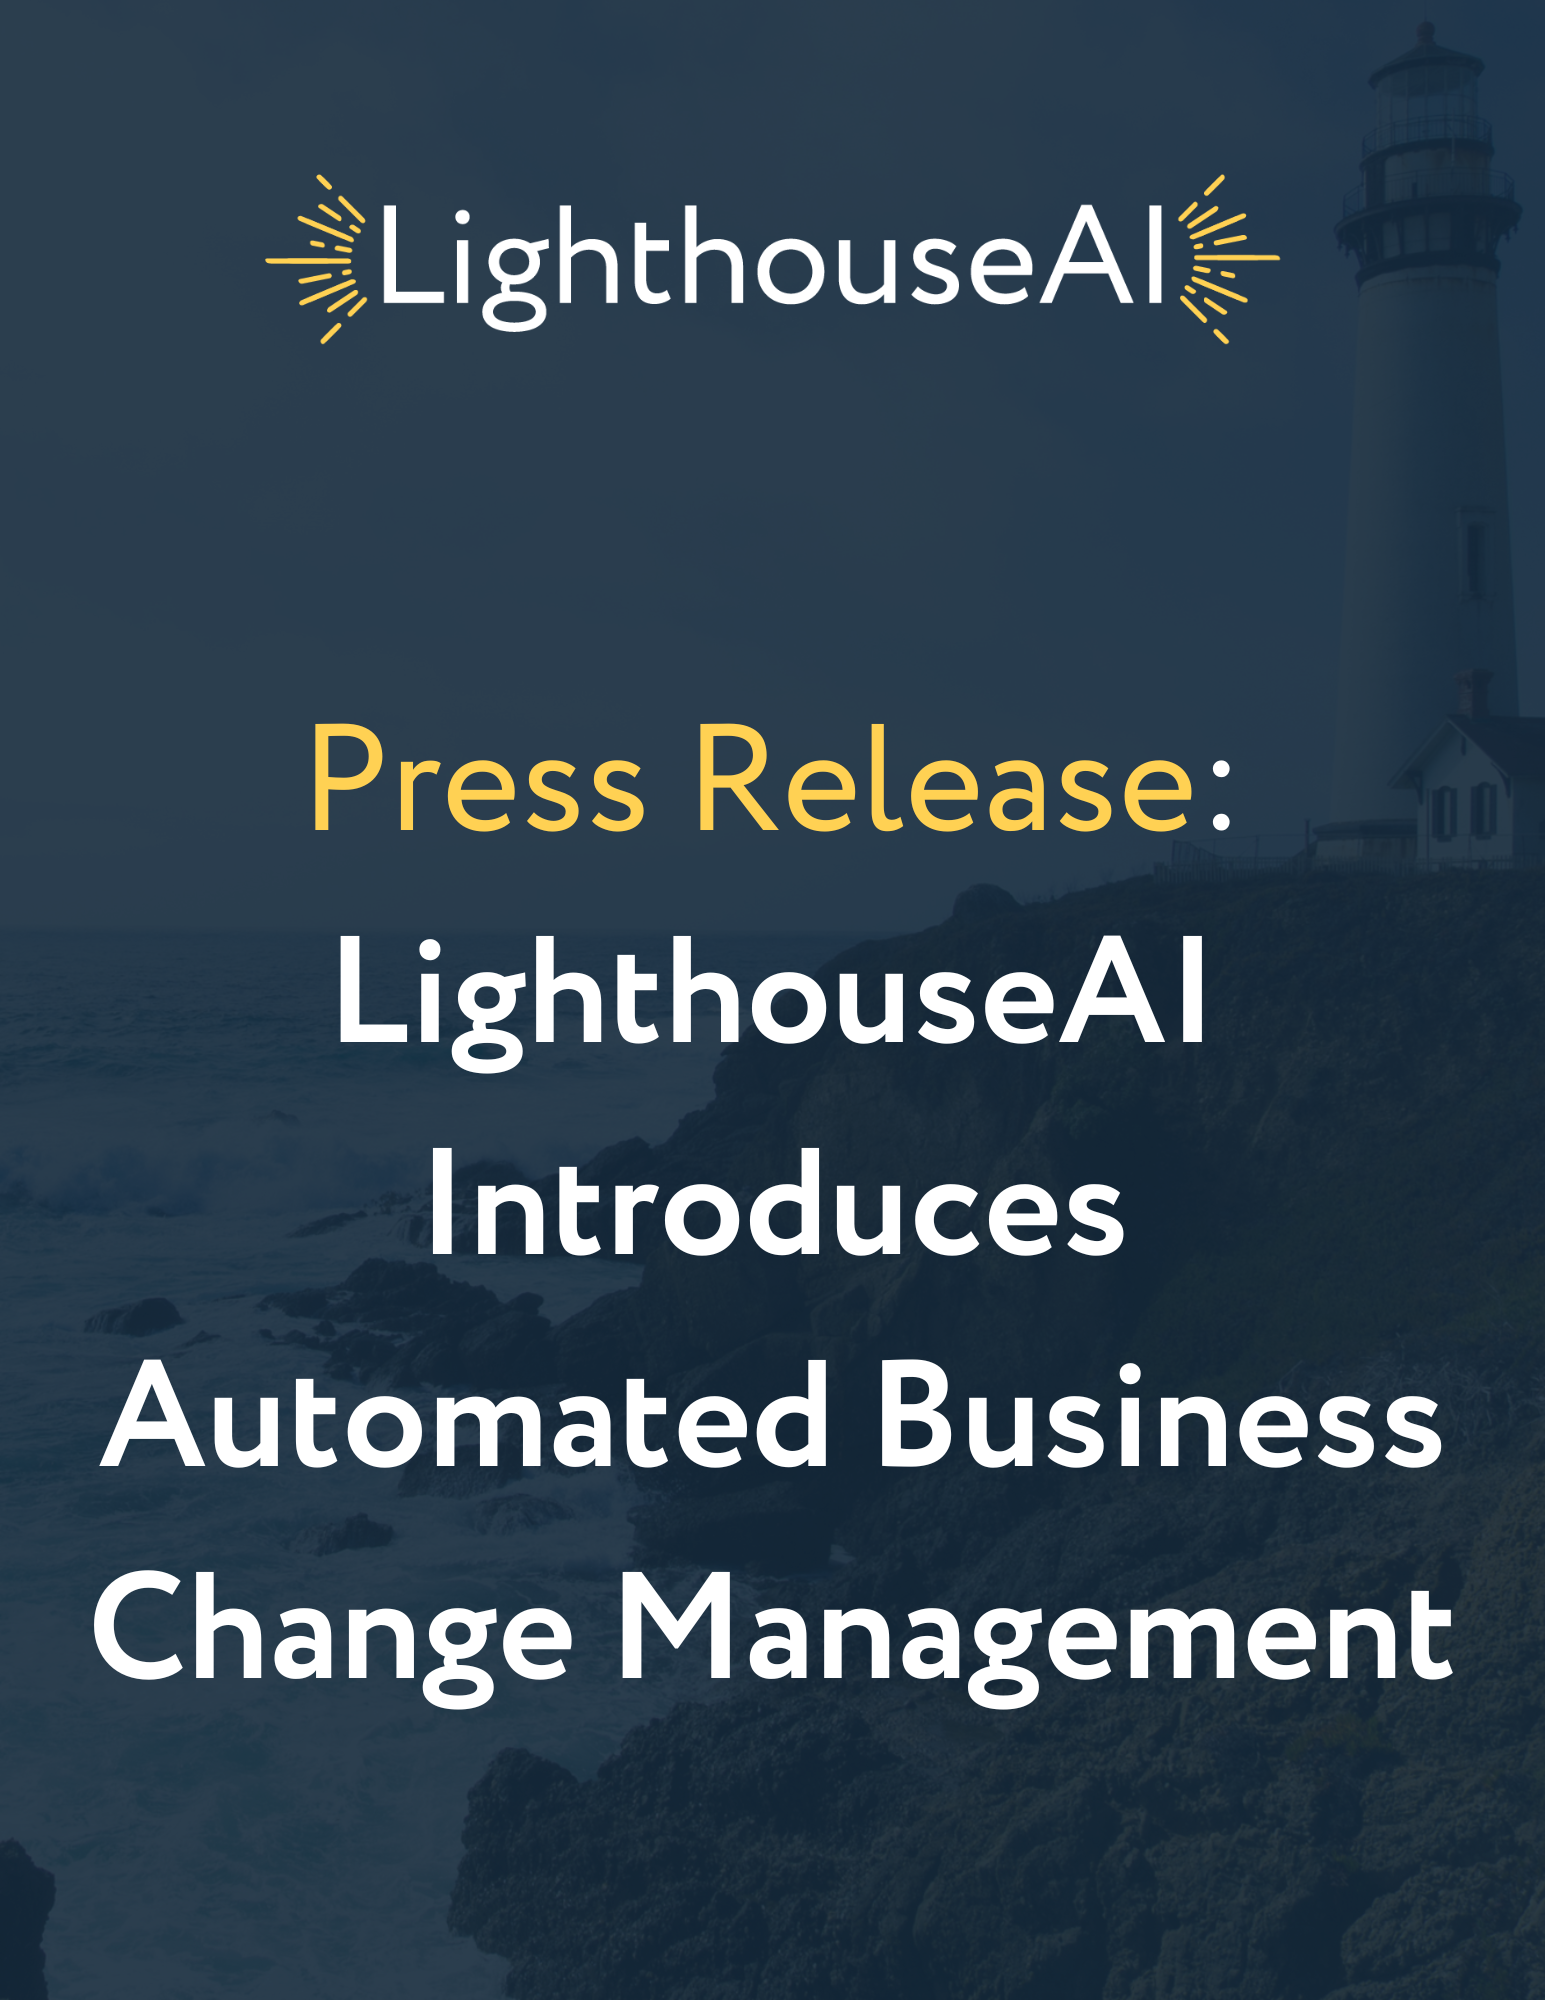 Automated Business Change Management